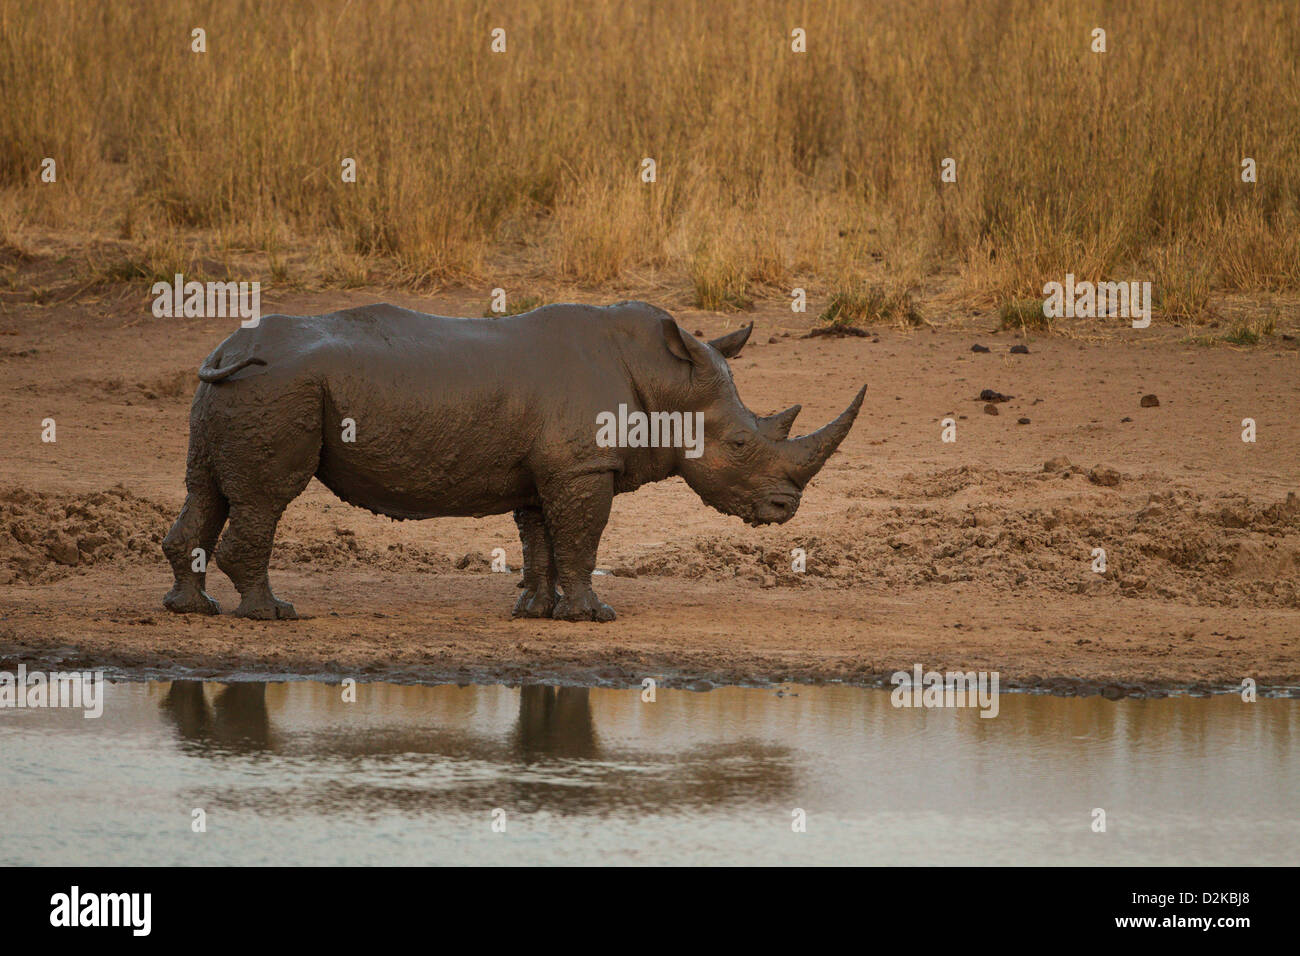 Rhino, White Rhinoceros (Ceratotherium simum) emerging from a lake at dusk after a mud bath Stock Photo